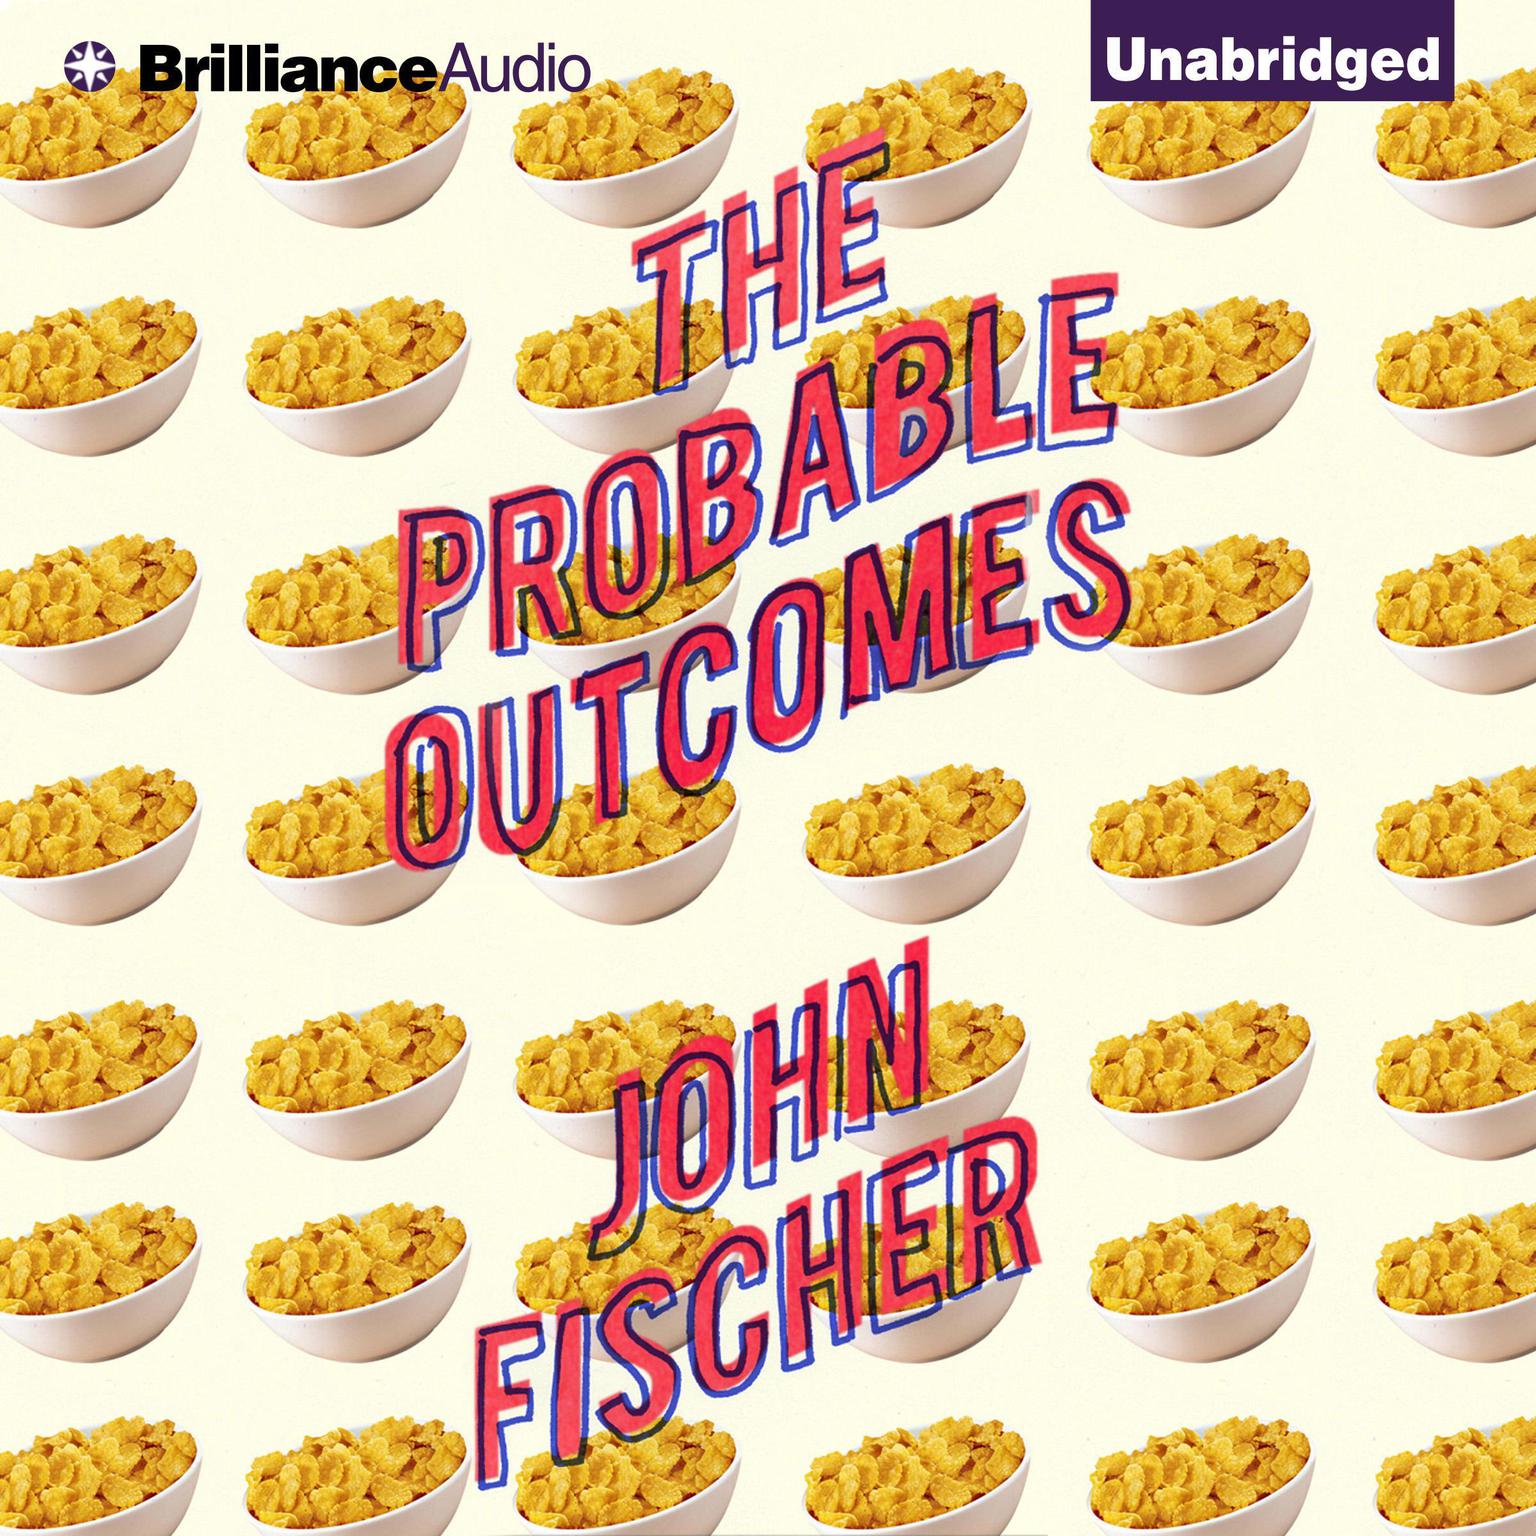 The Probable Outcomes Audiobook, by John Fischer